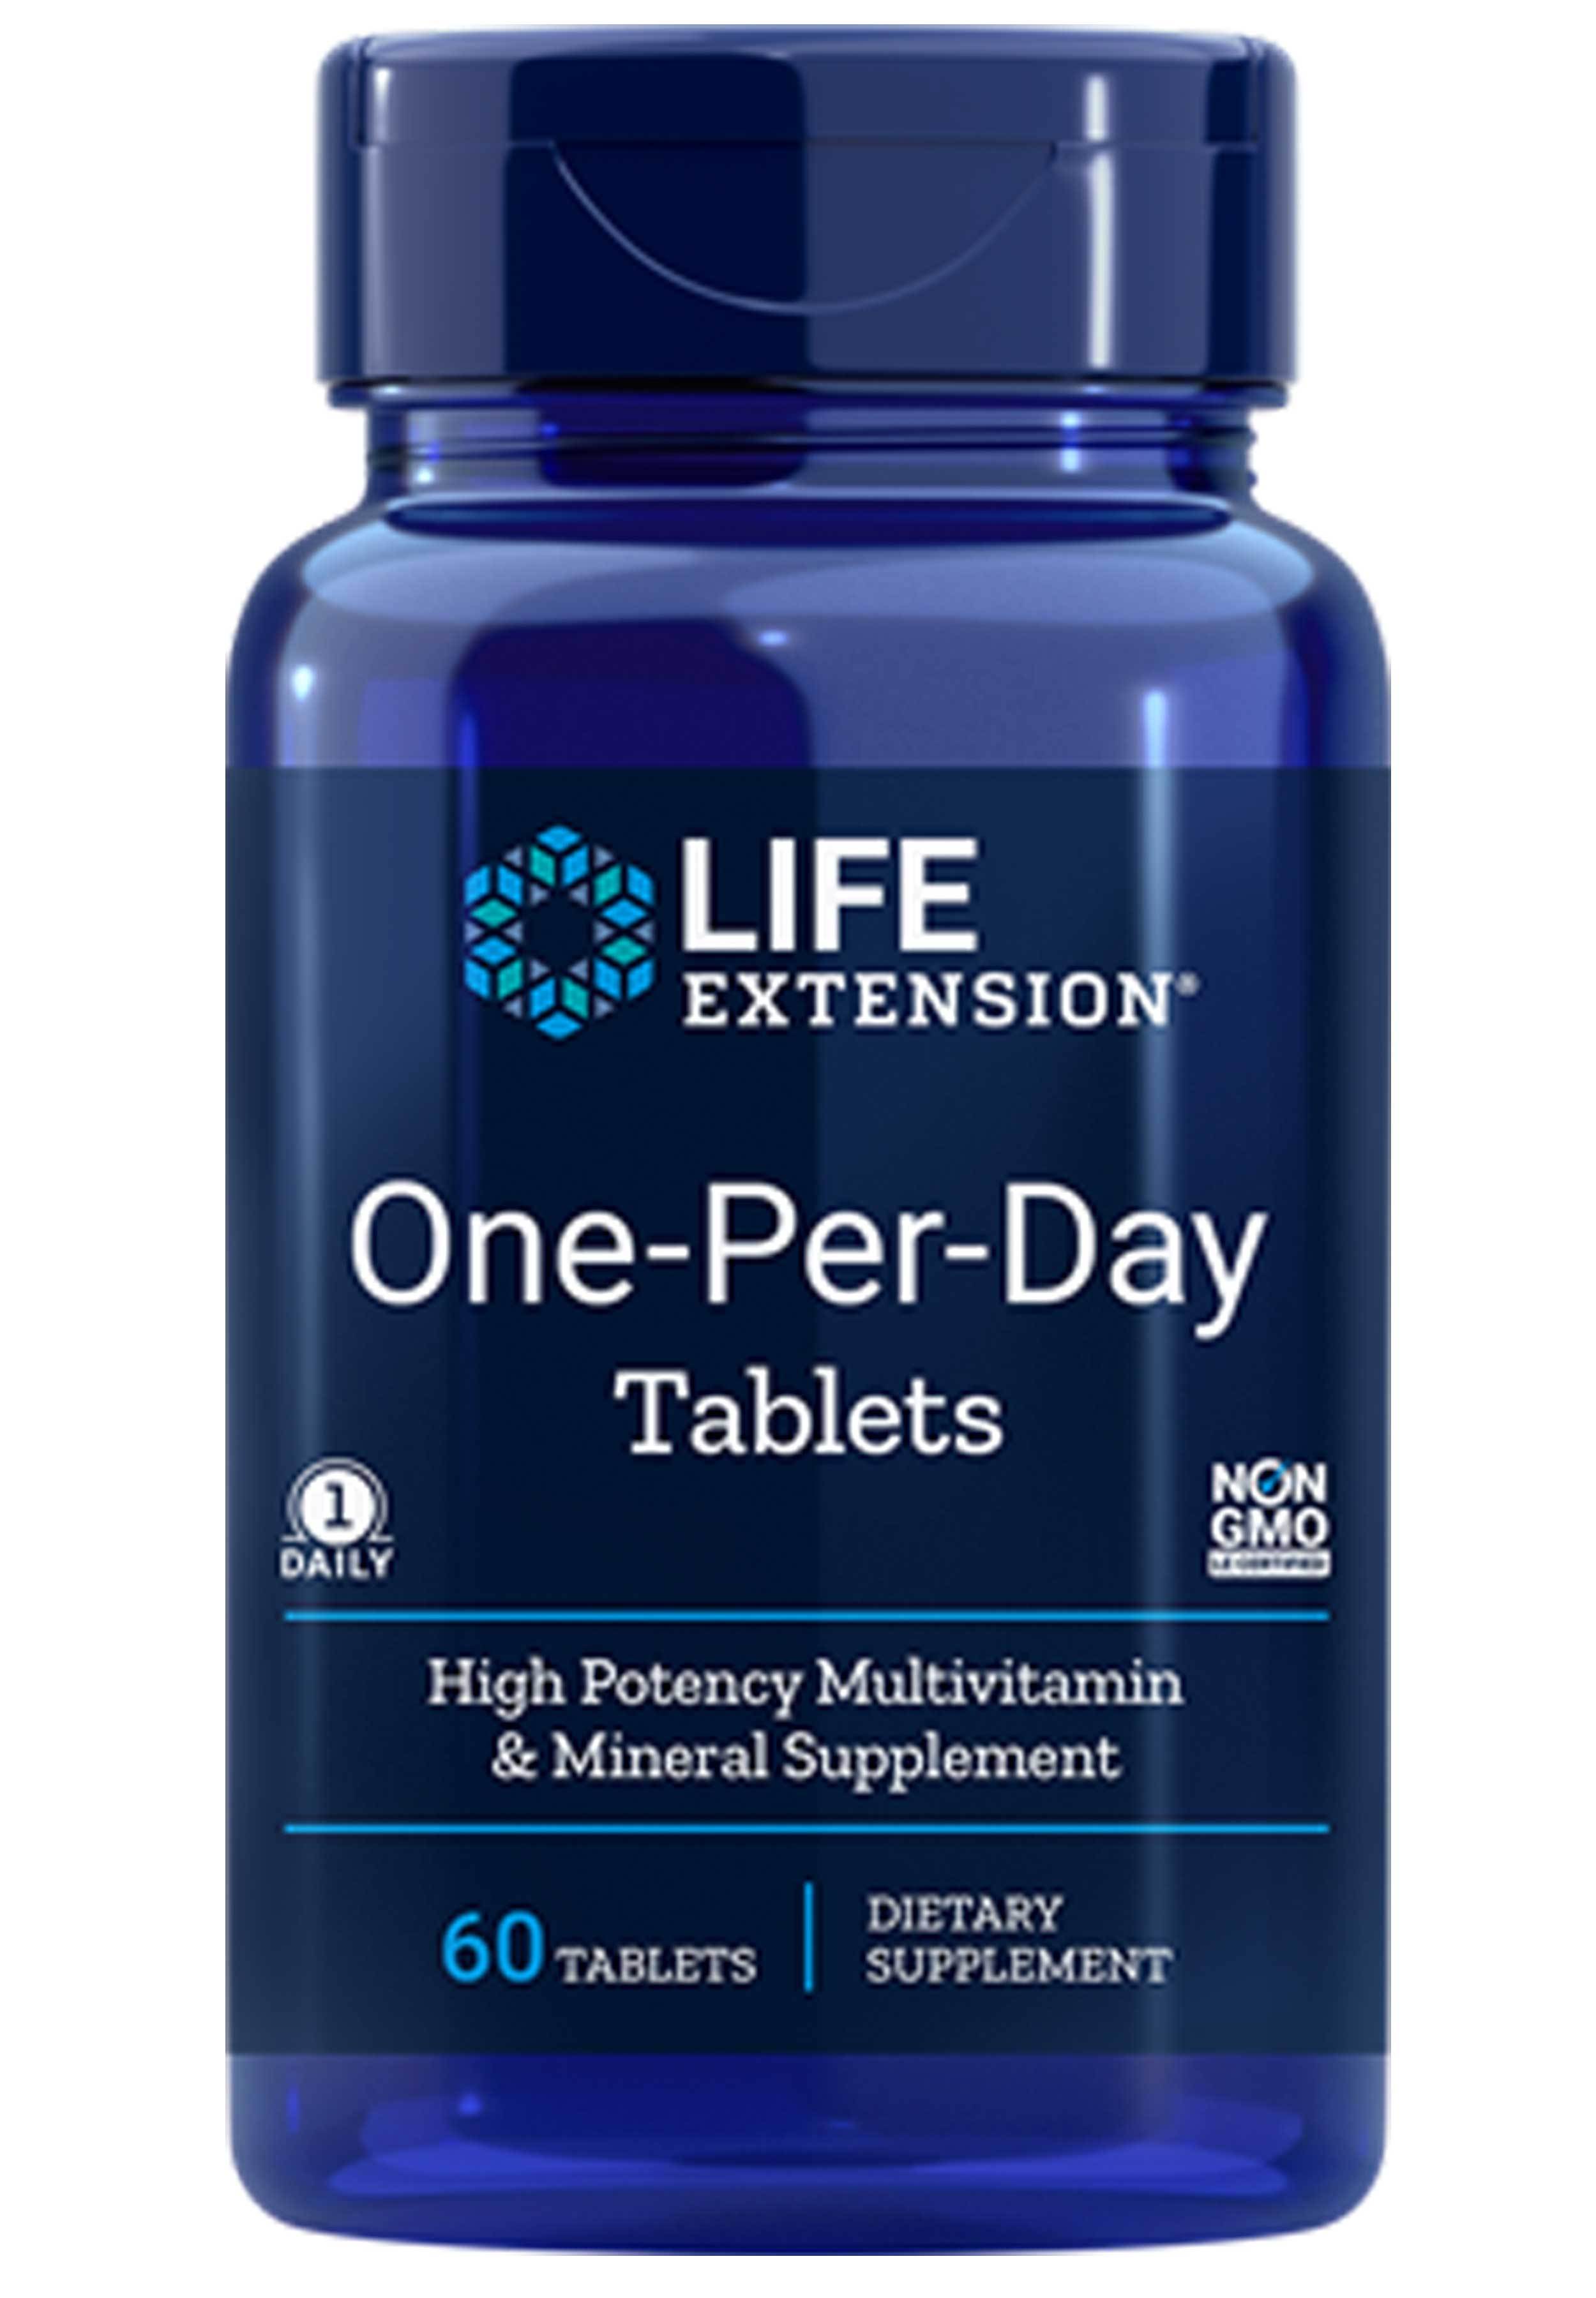 Life Extension One-Per-Day Tablets